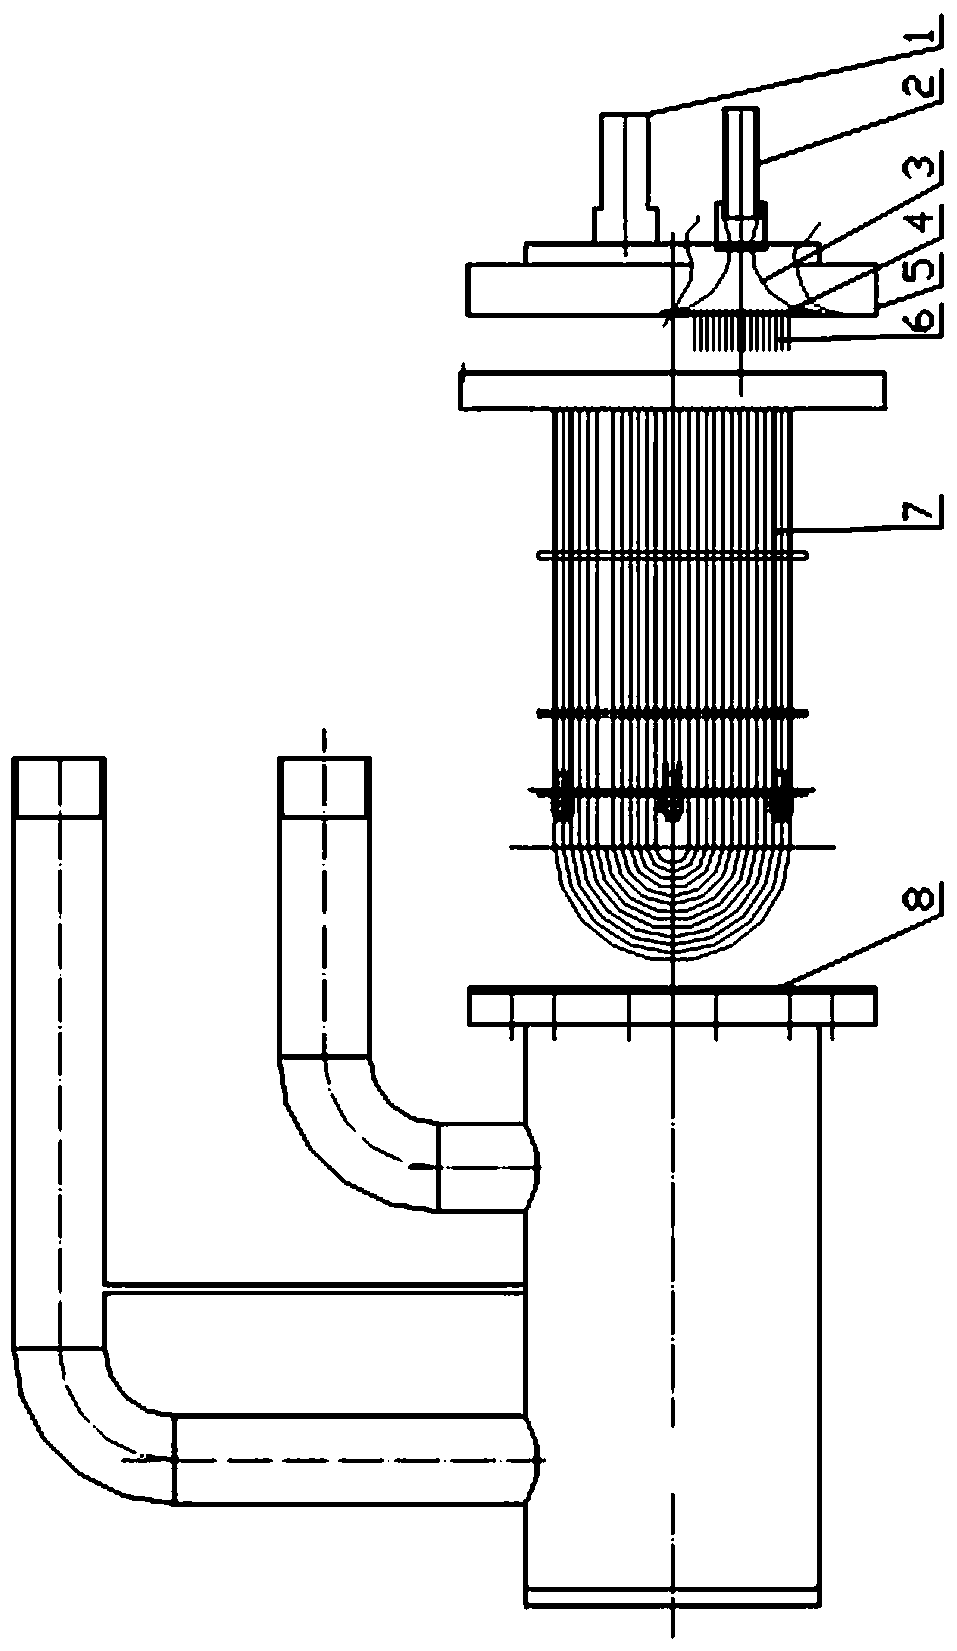 A two-phase distributive dry evaporator